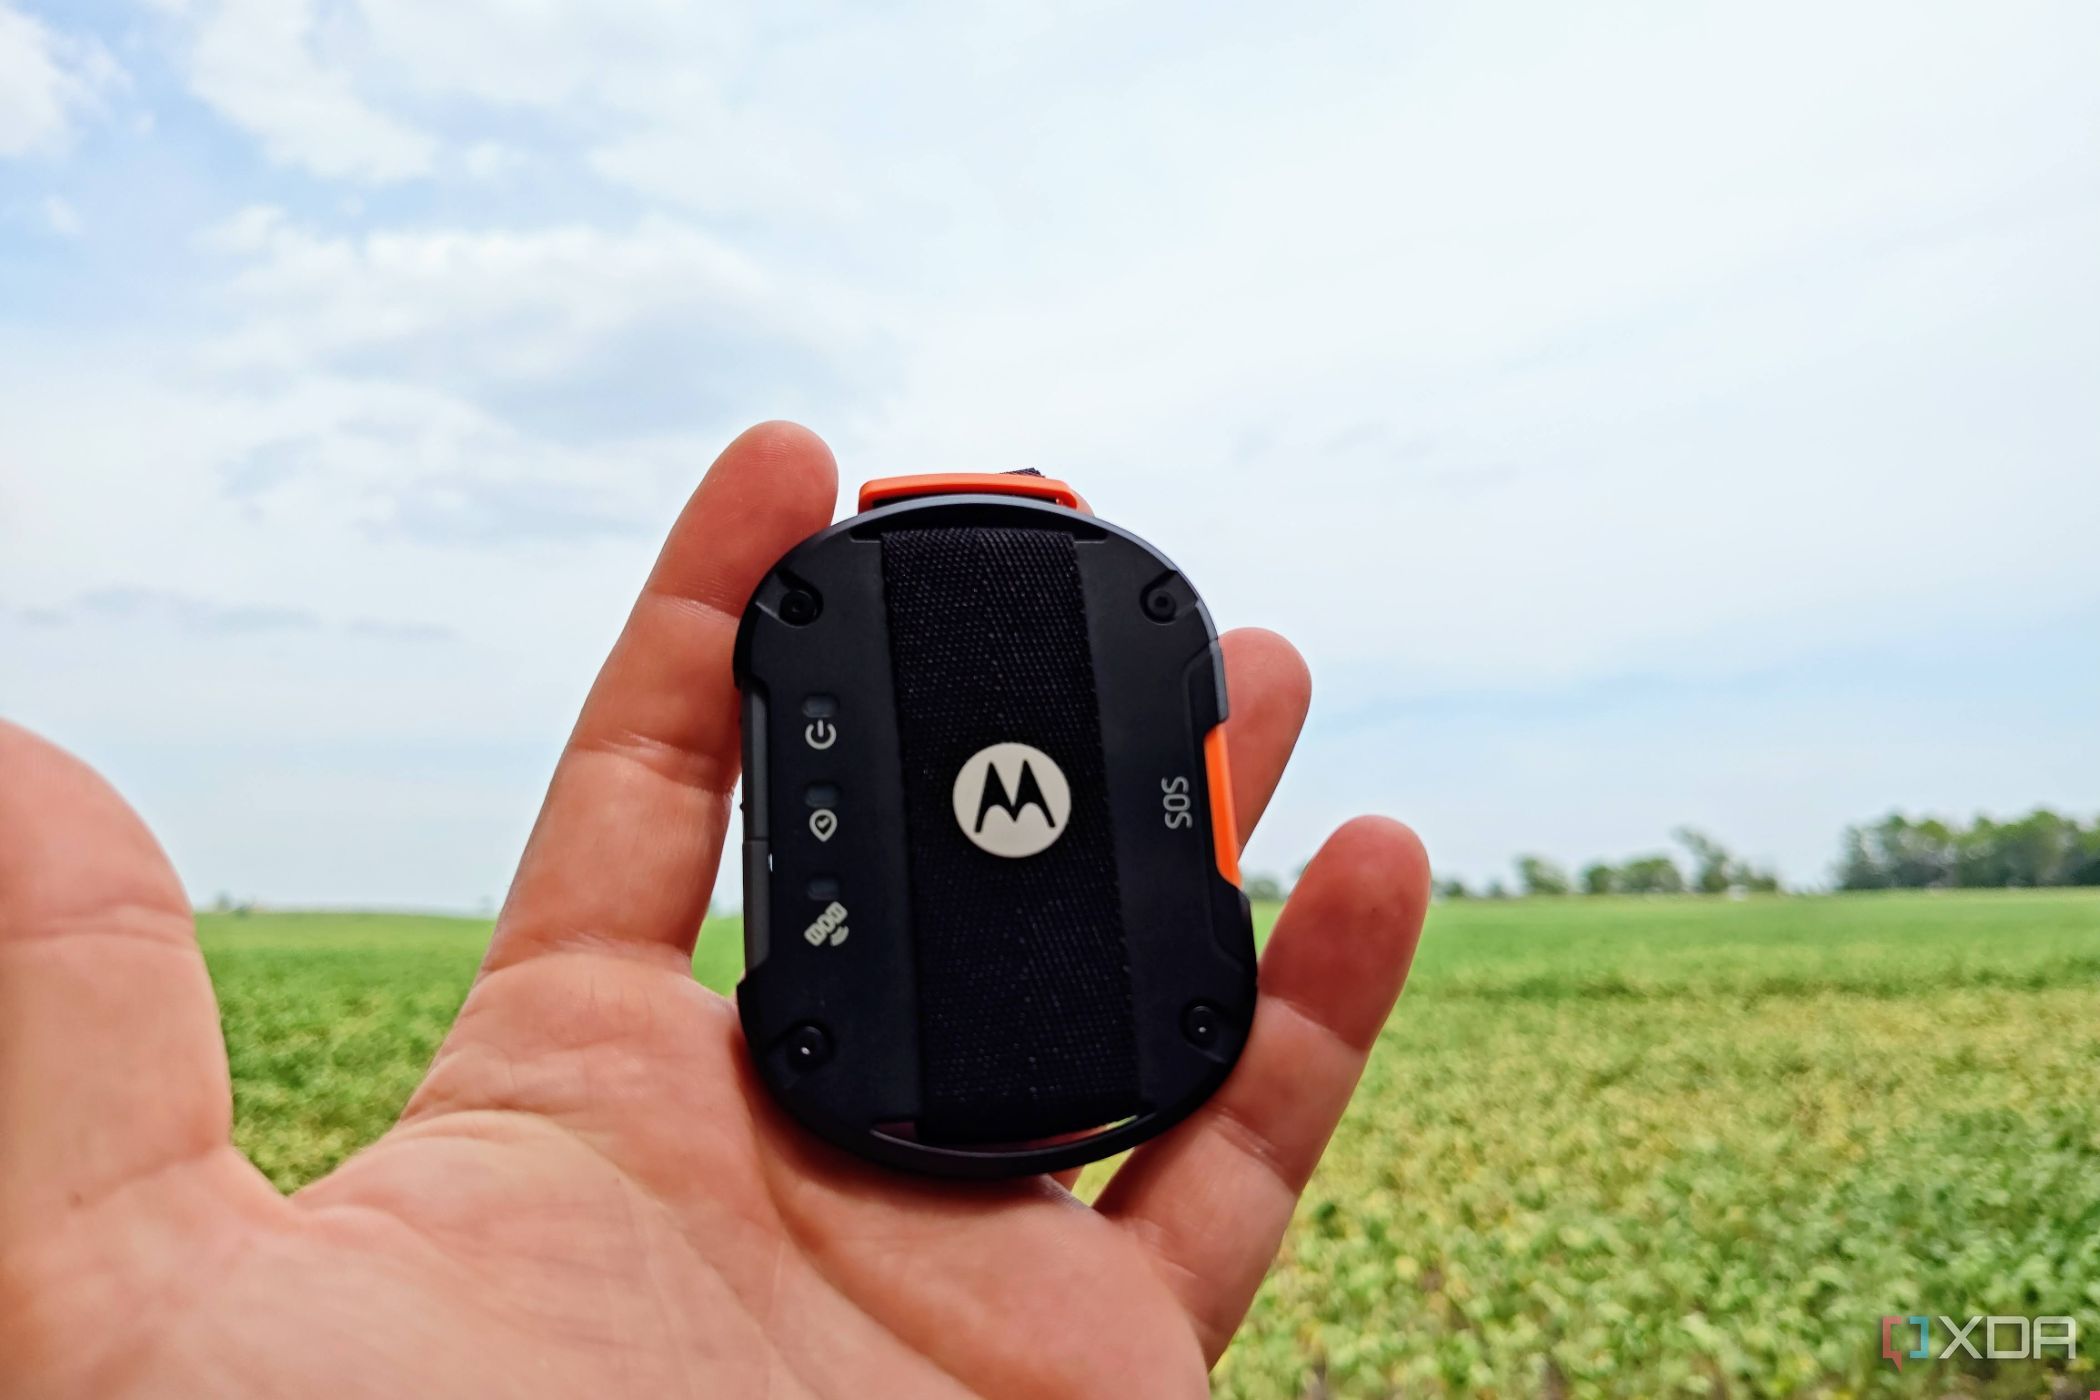 Motorola Defy Satellite Link in hand with open field and sky behind it